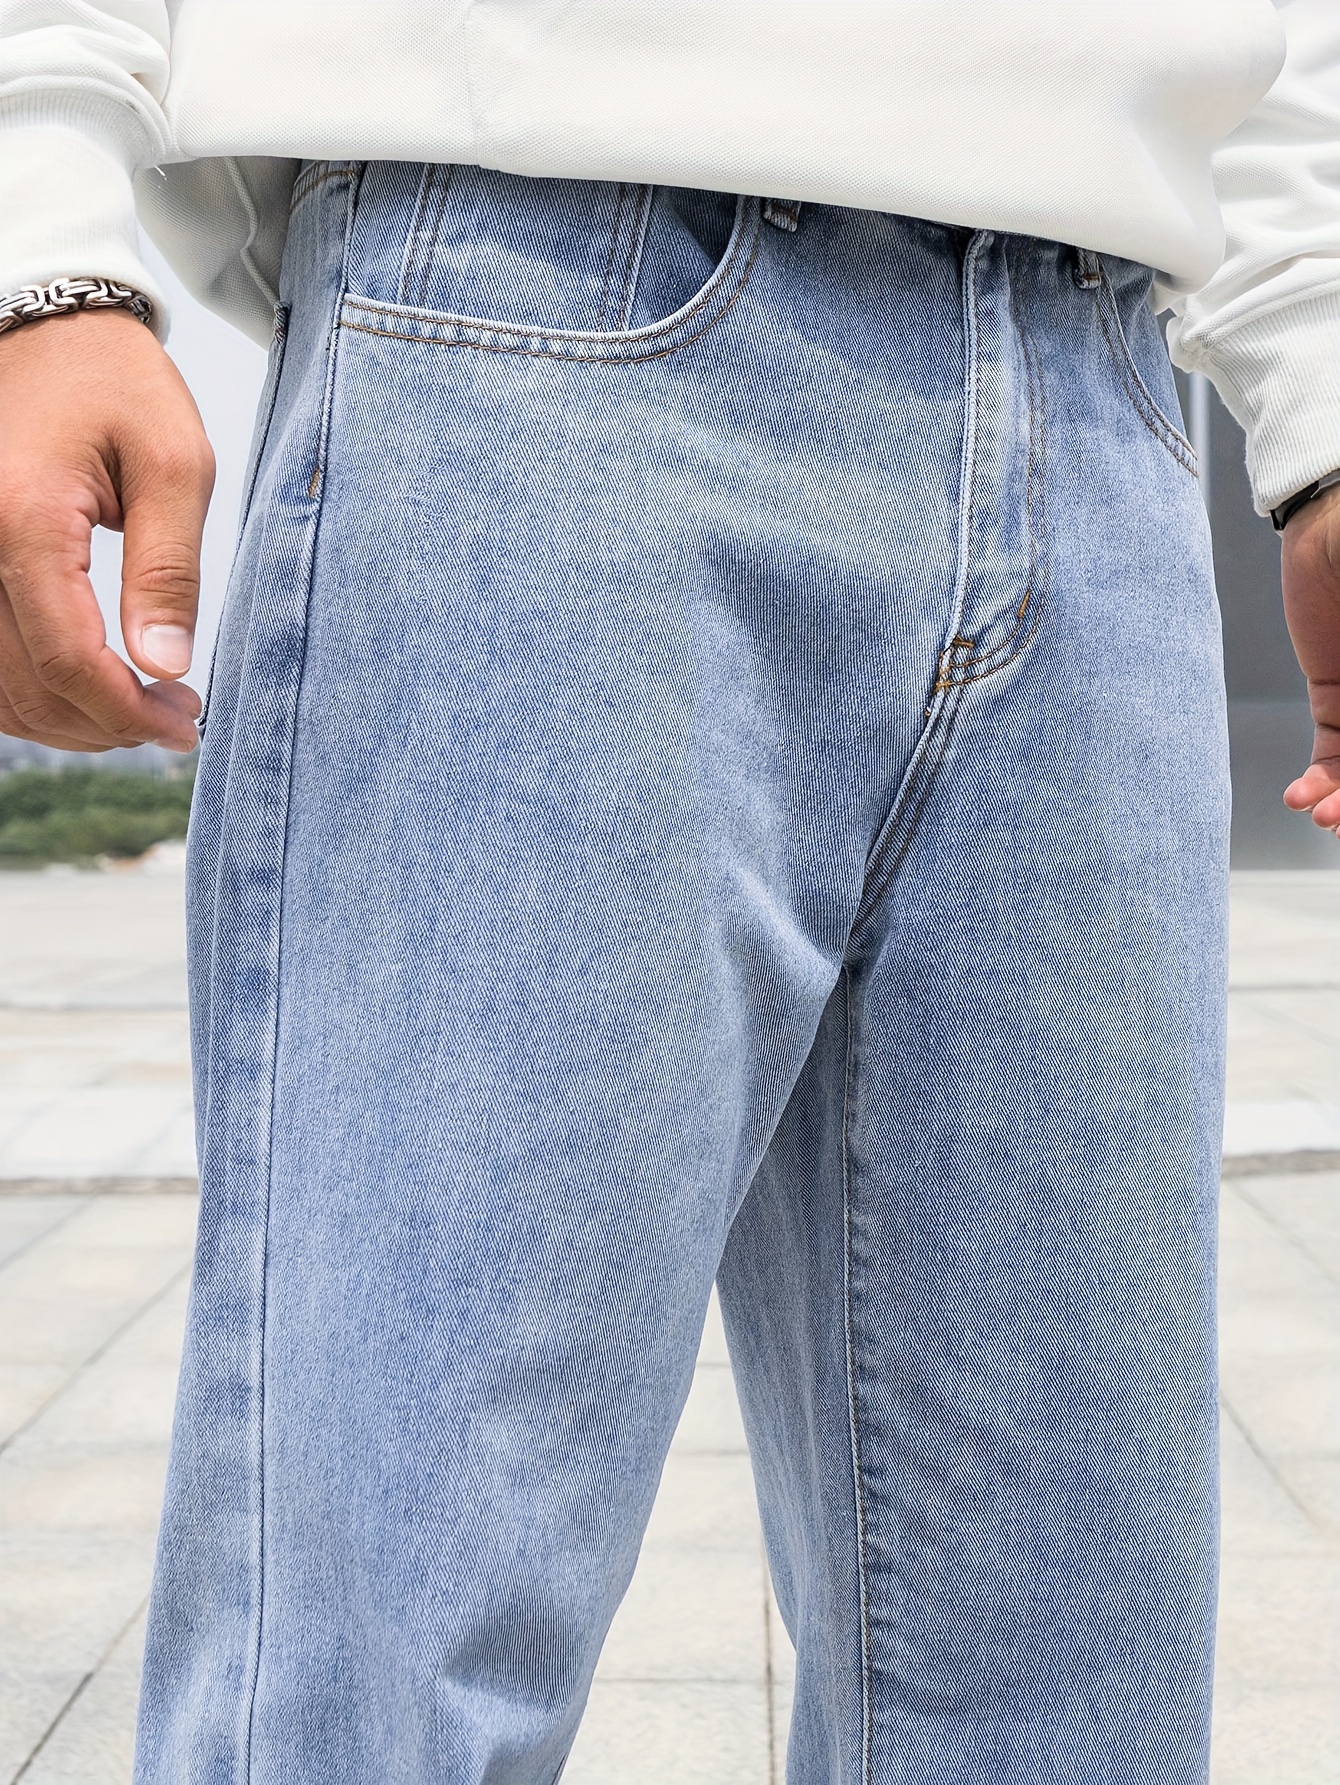 American High Street Wide Leg Jeans Men Vibe Grade, Straight Tube, Loose  Fit, Slim Flap, Casual Pants For Spring And Autumn From Swallowwa, $36.04